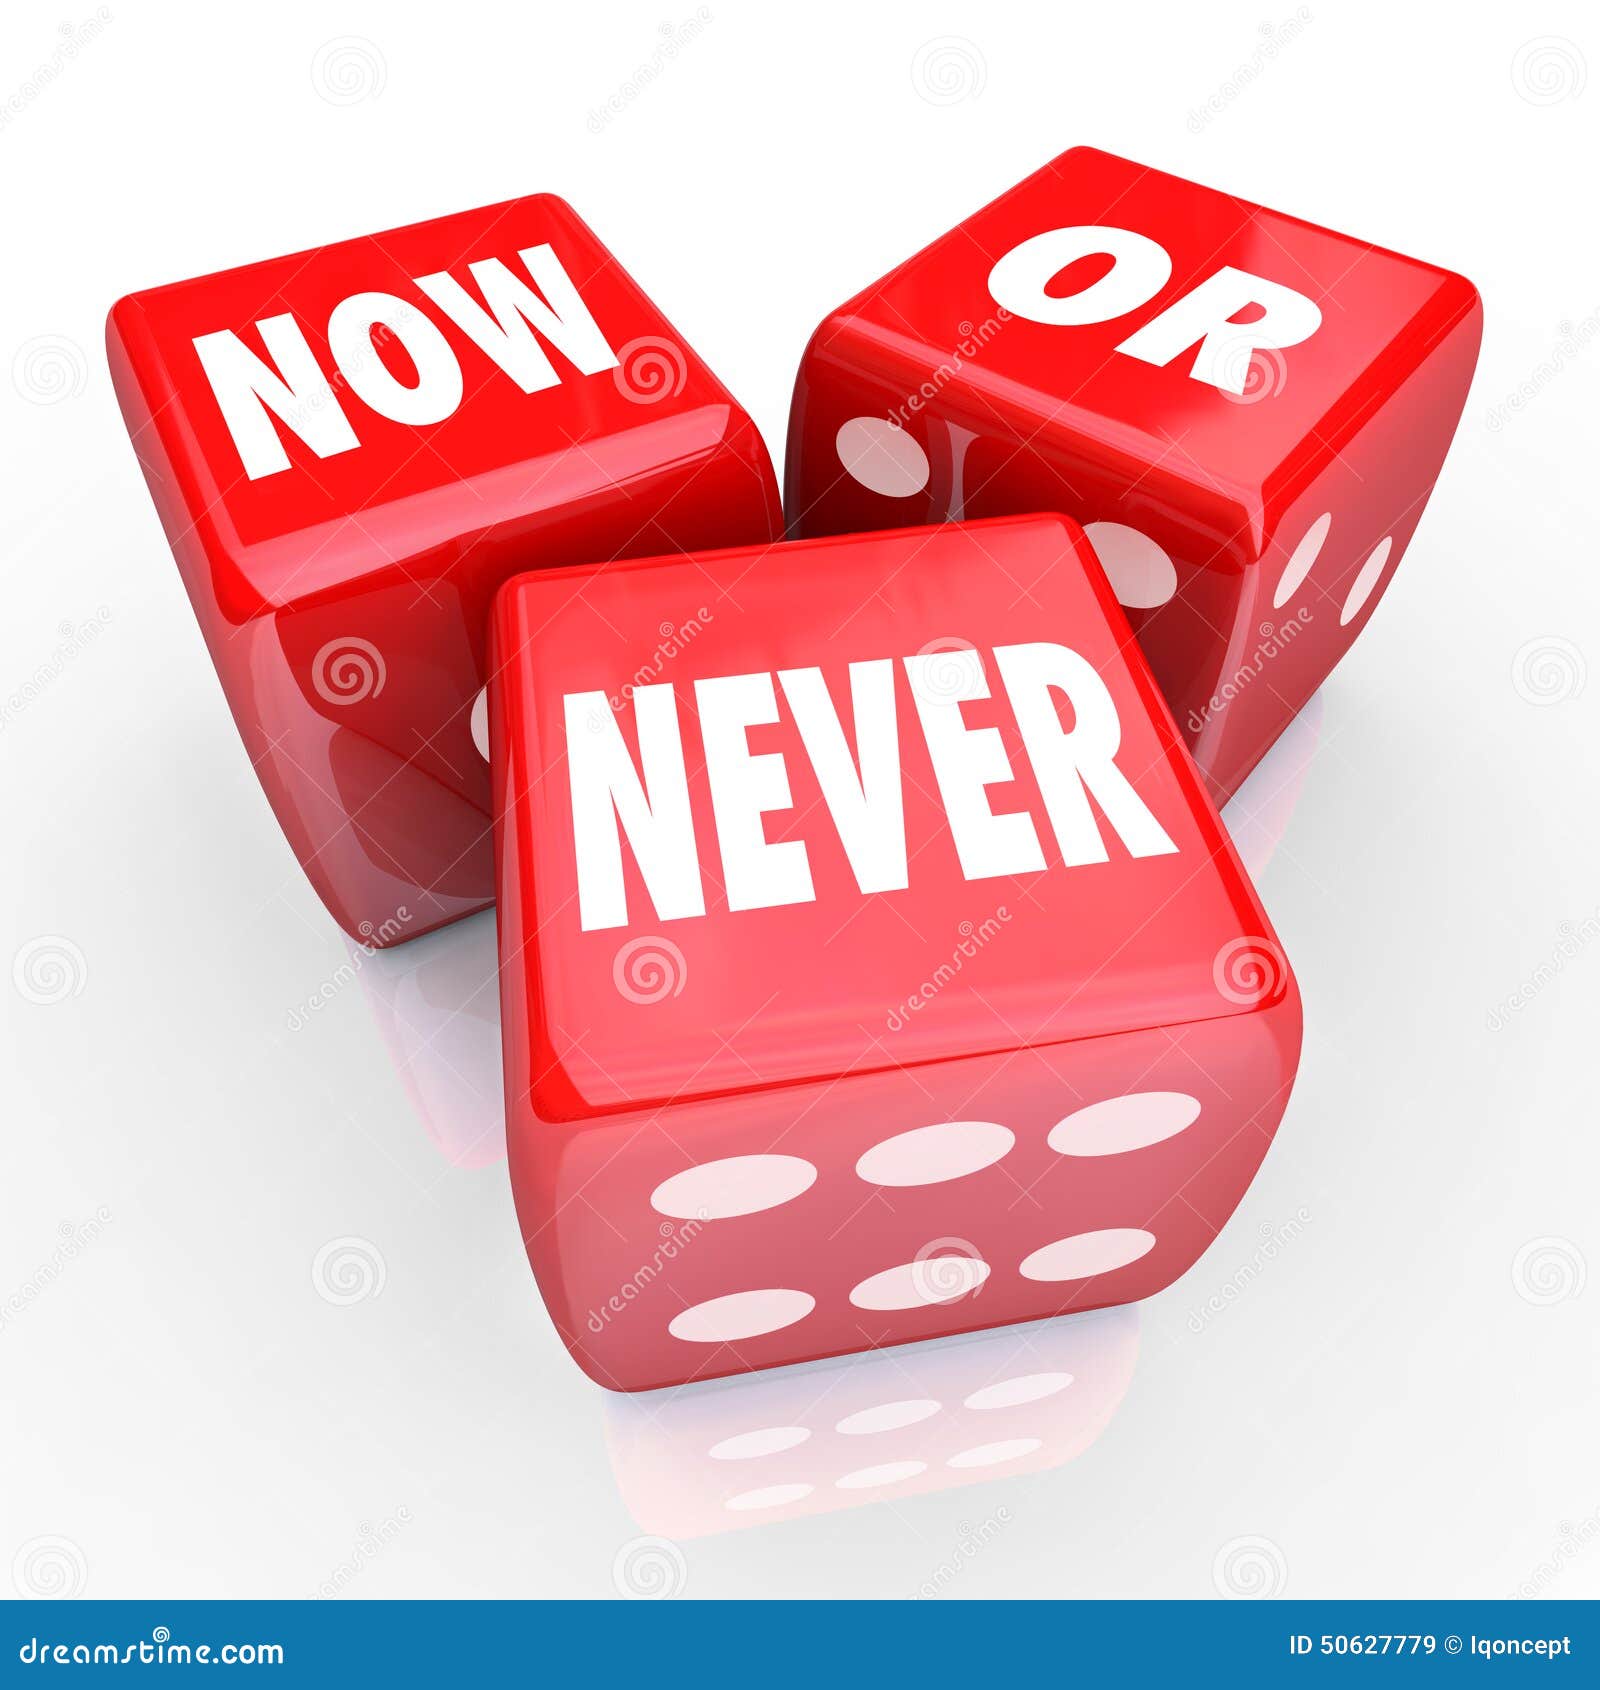 now or never three 3 red dice act limited offer opportunity